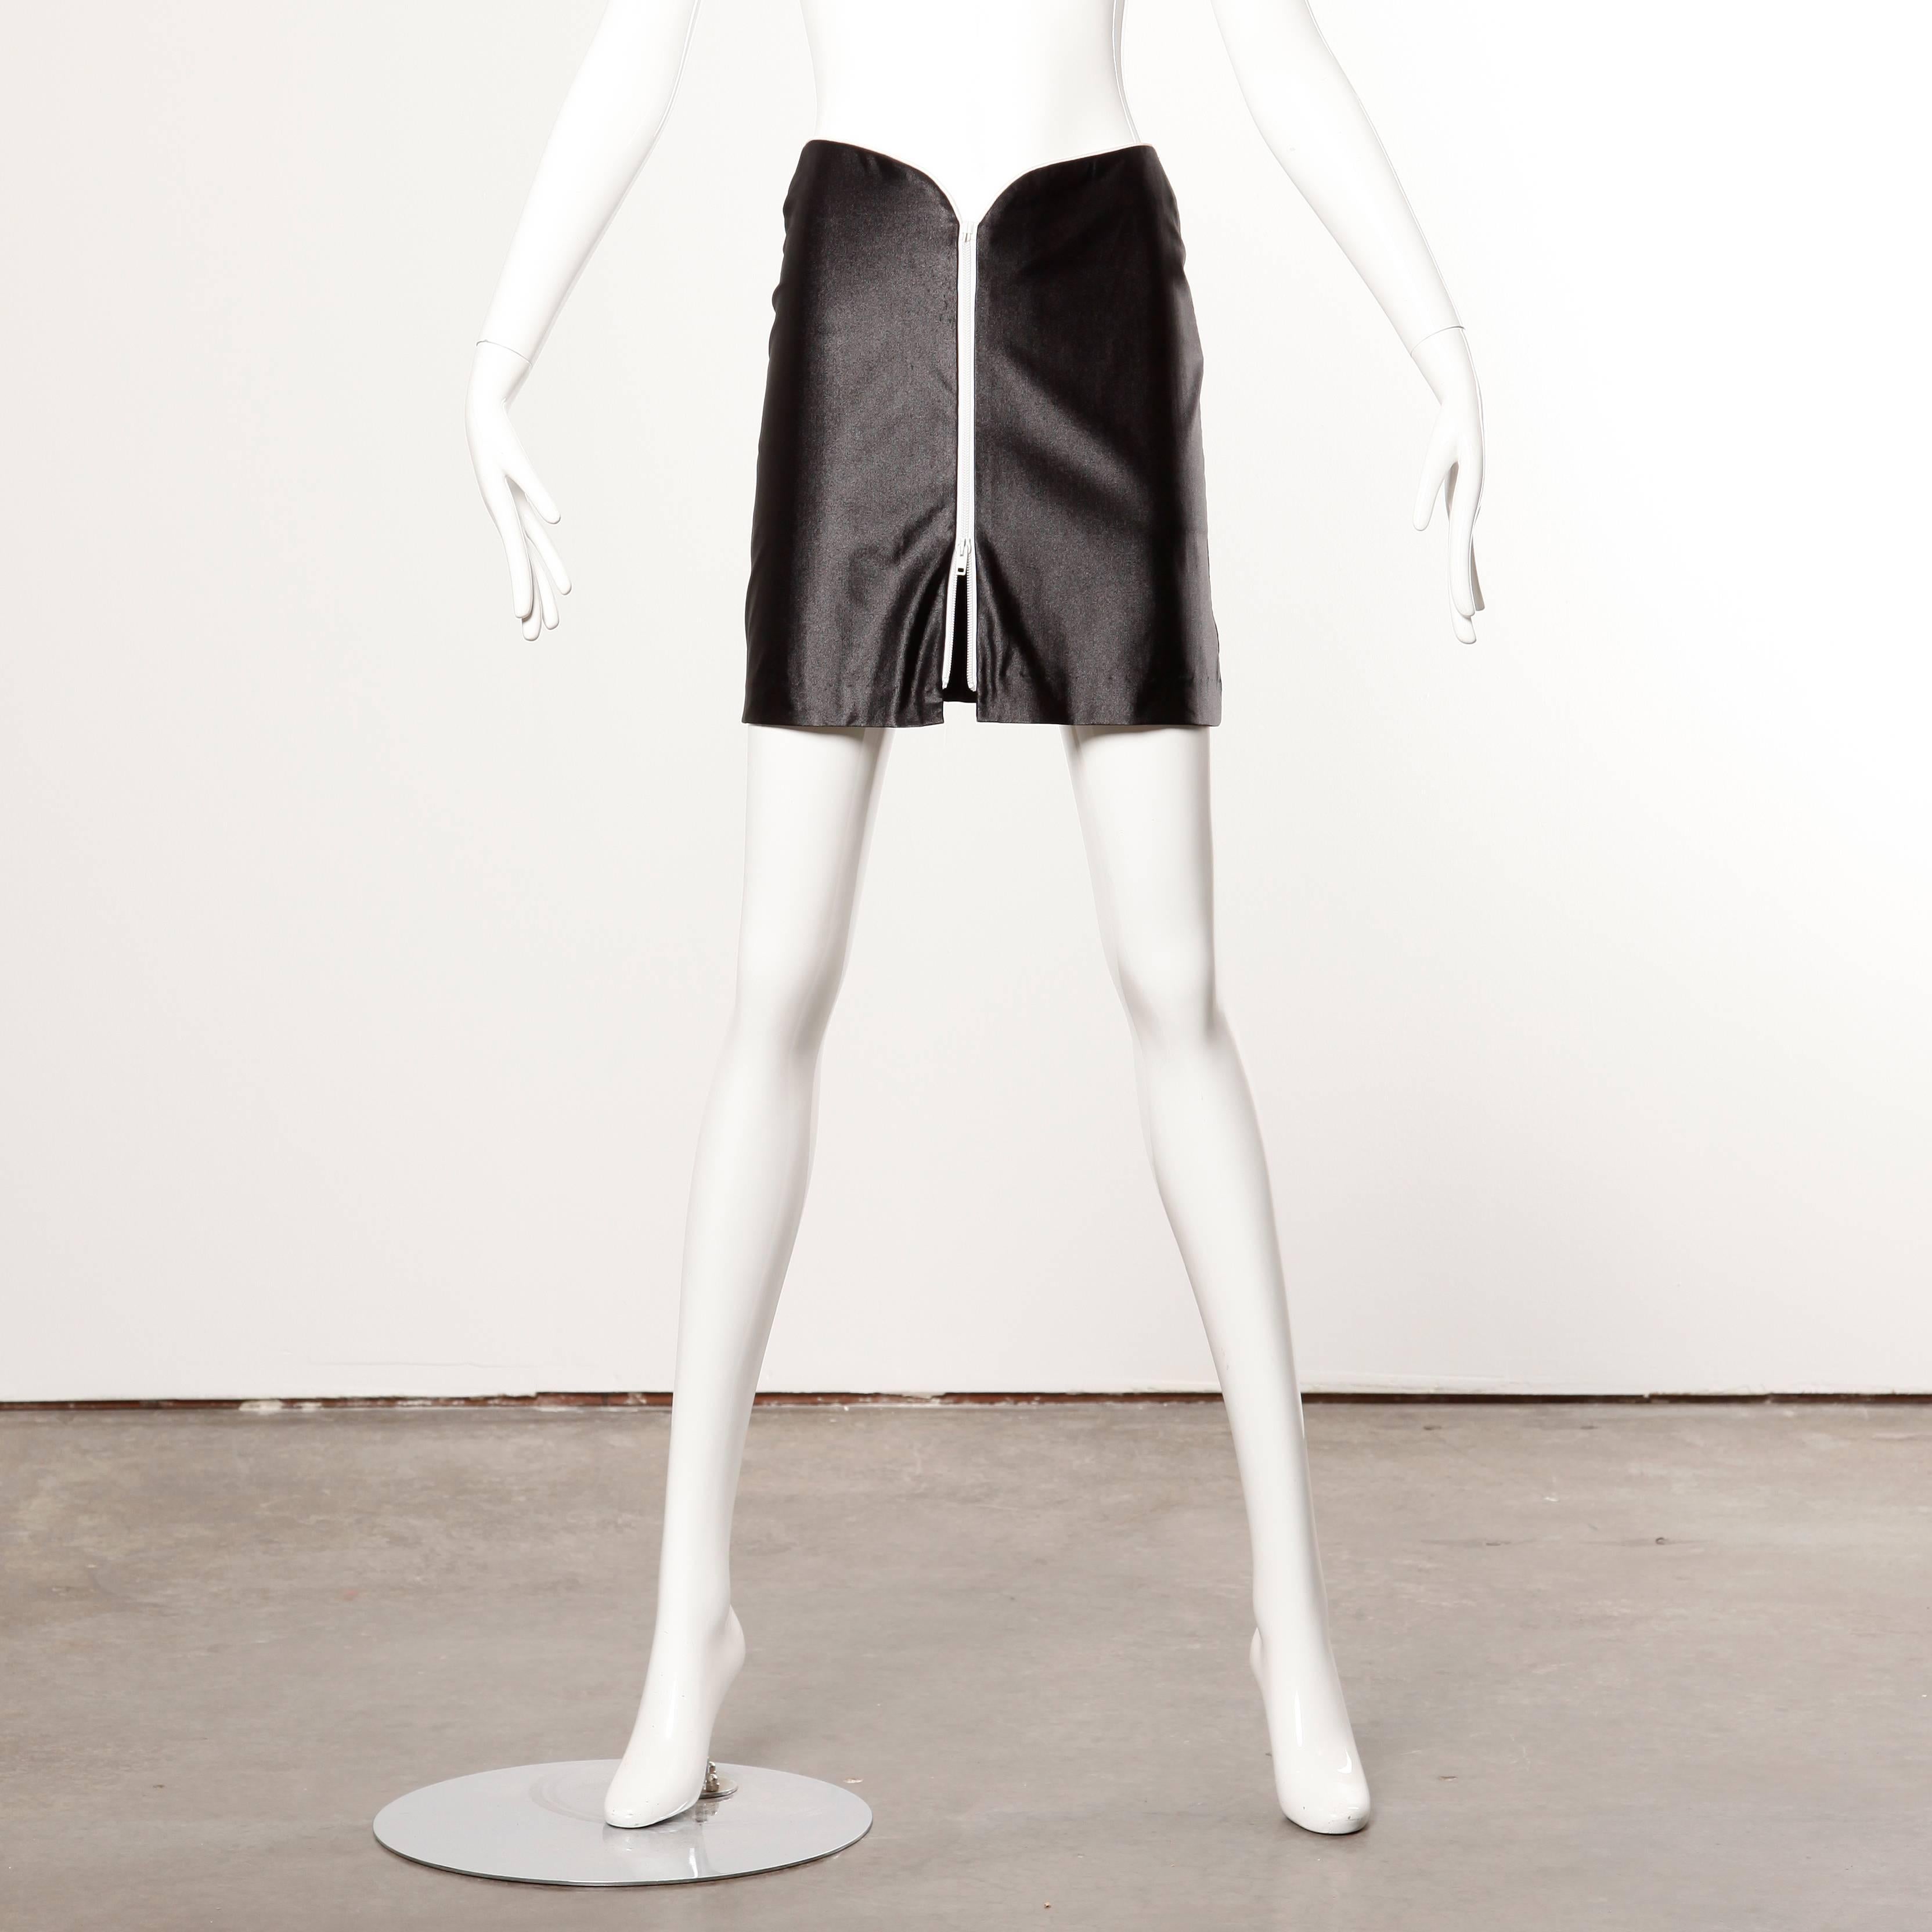 Iconic 1970s vintage shiny wet look disco zip up mini skirt by Le Gambi.

Details: 

Unlined
Zip Front Closure
Marked Size: 9/10
Estimated Size: Small
Color: Black/ White
Fabric: 85% Nylon/ 15% Lycra
Label: Le Gambi

Measurements: